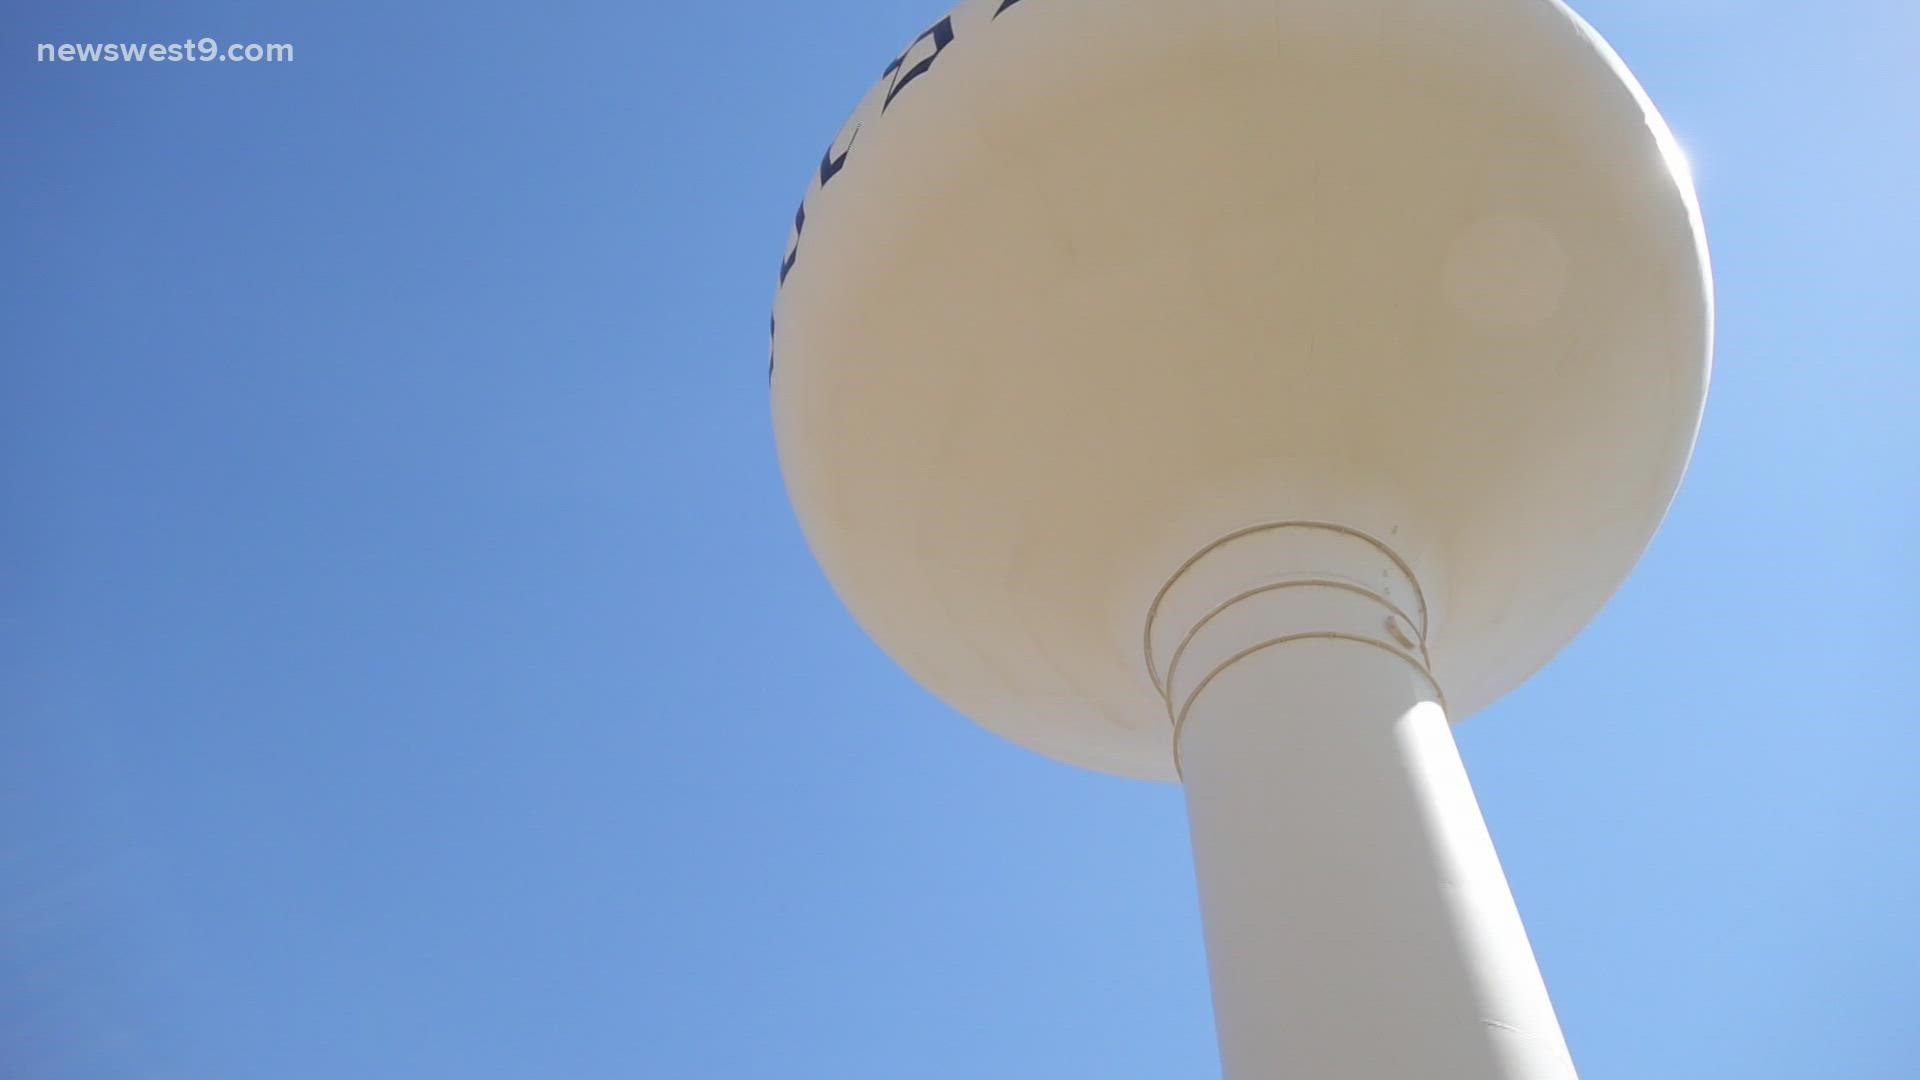 According to a spokesperson with the City of Odessa, as of Friday the repairs to the water tower have been completed and the tank is back in service.